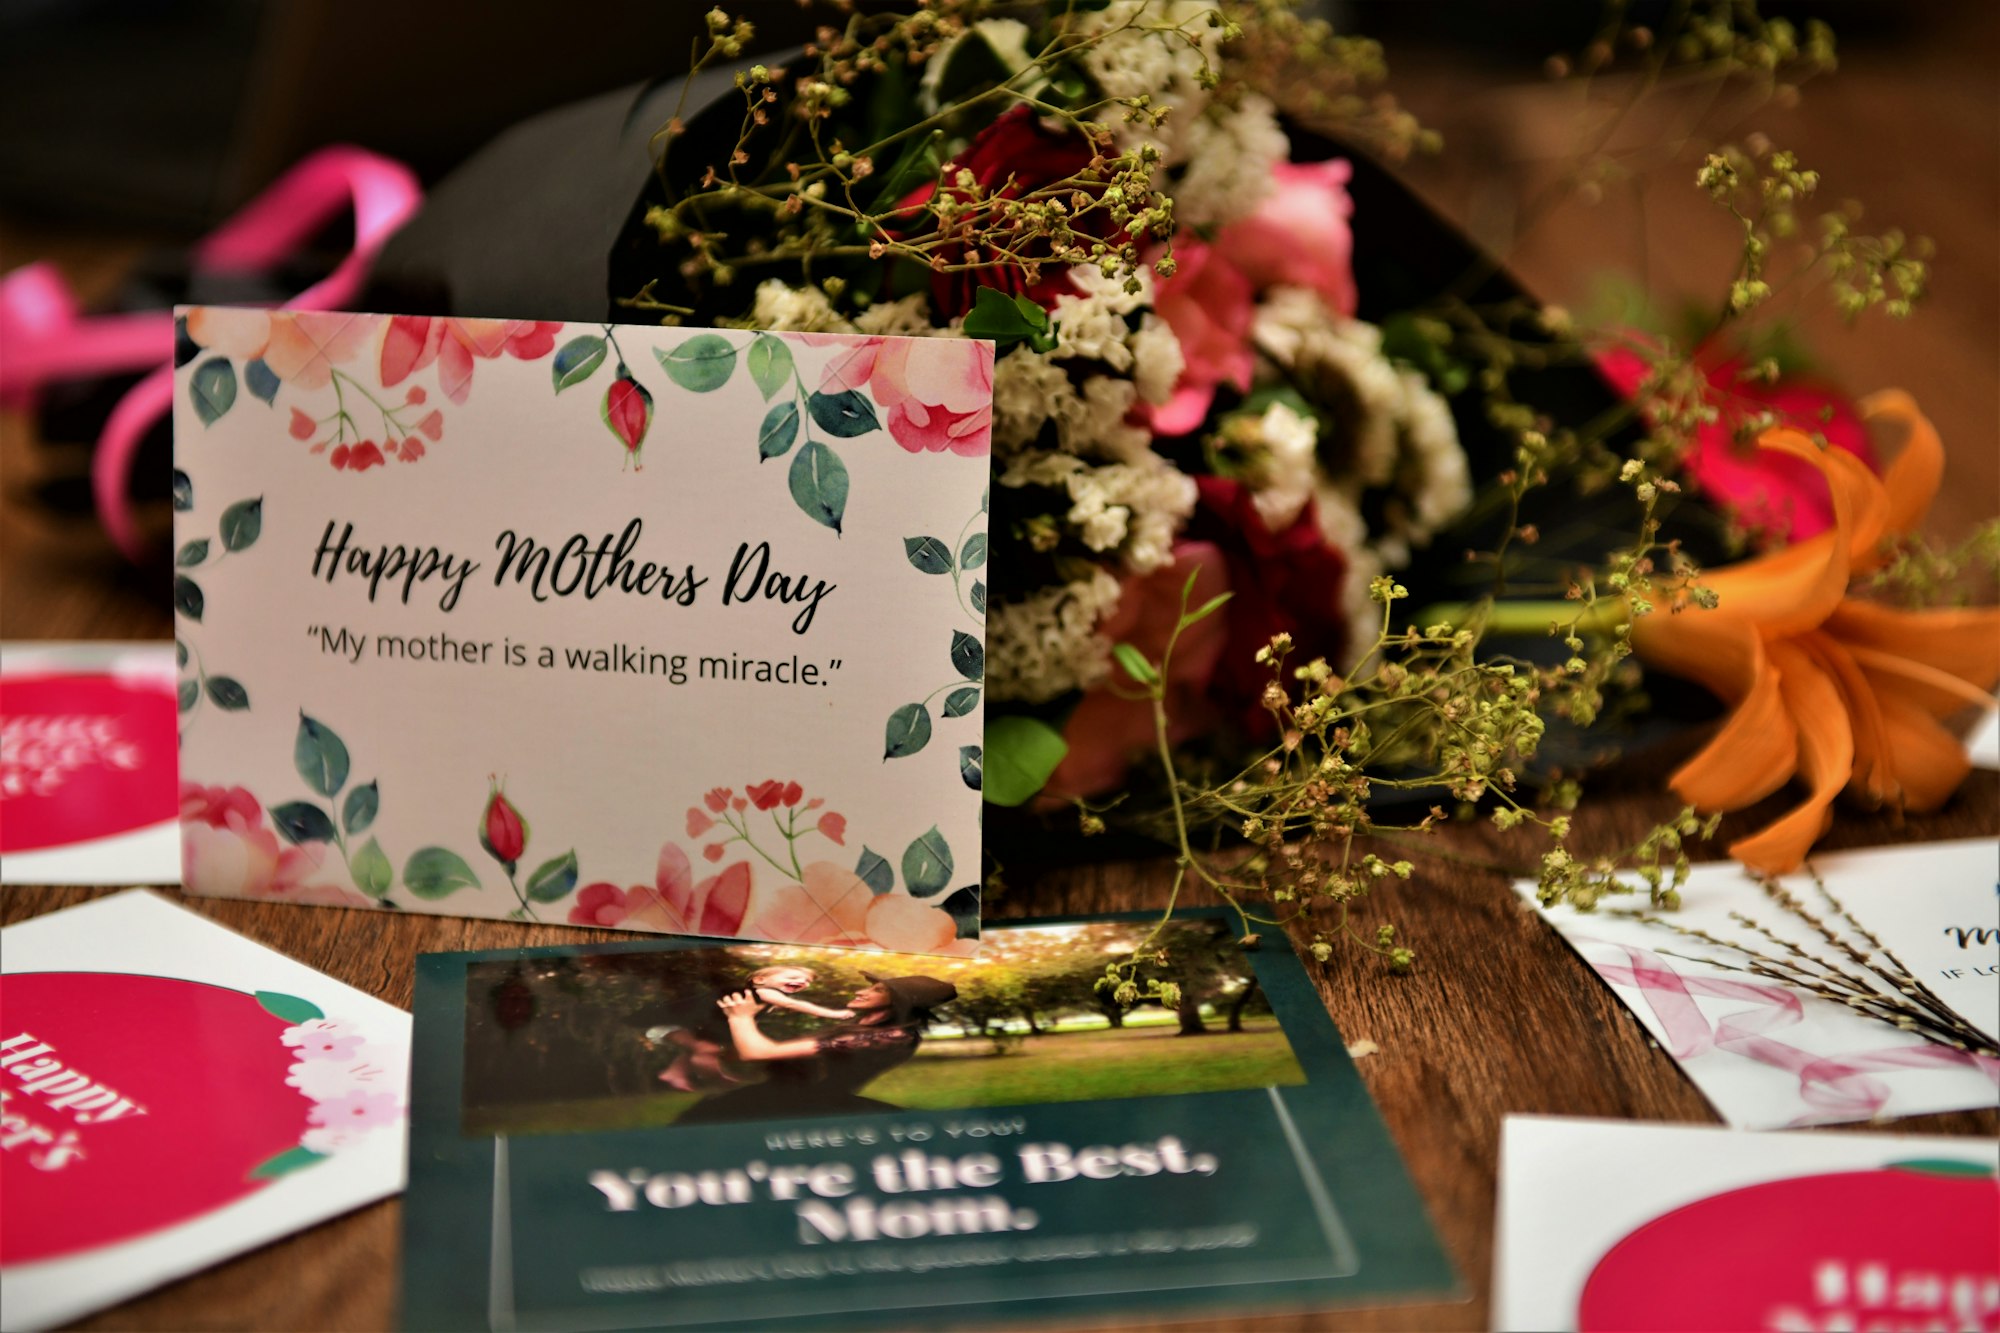 Best 100+ Examples: Thank You for Mothers Day Wishes That Warm Hearts